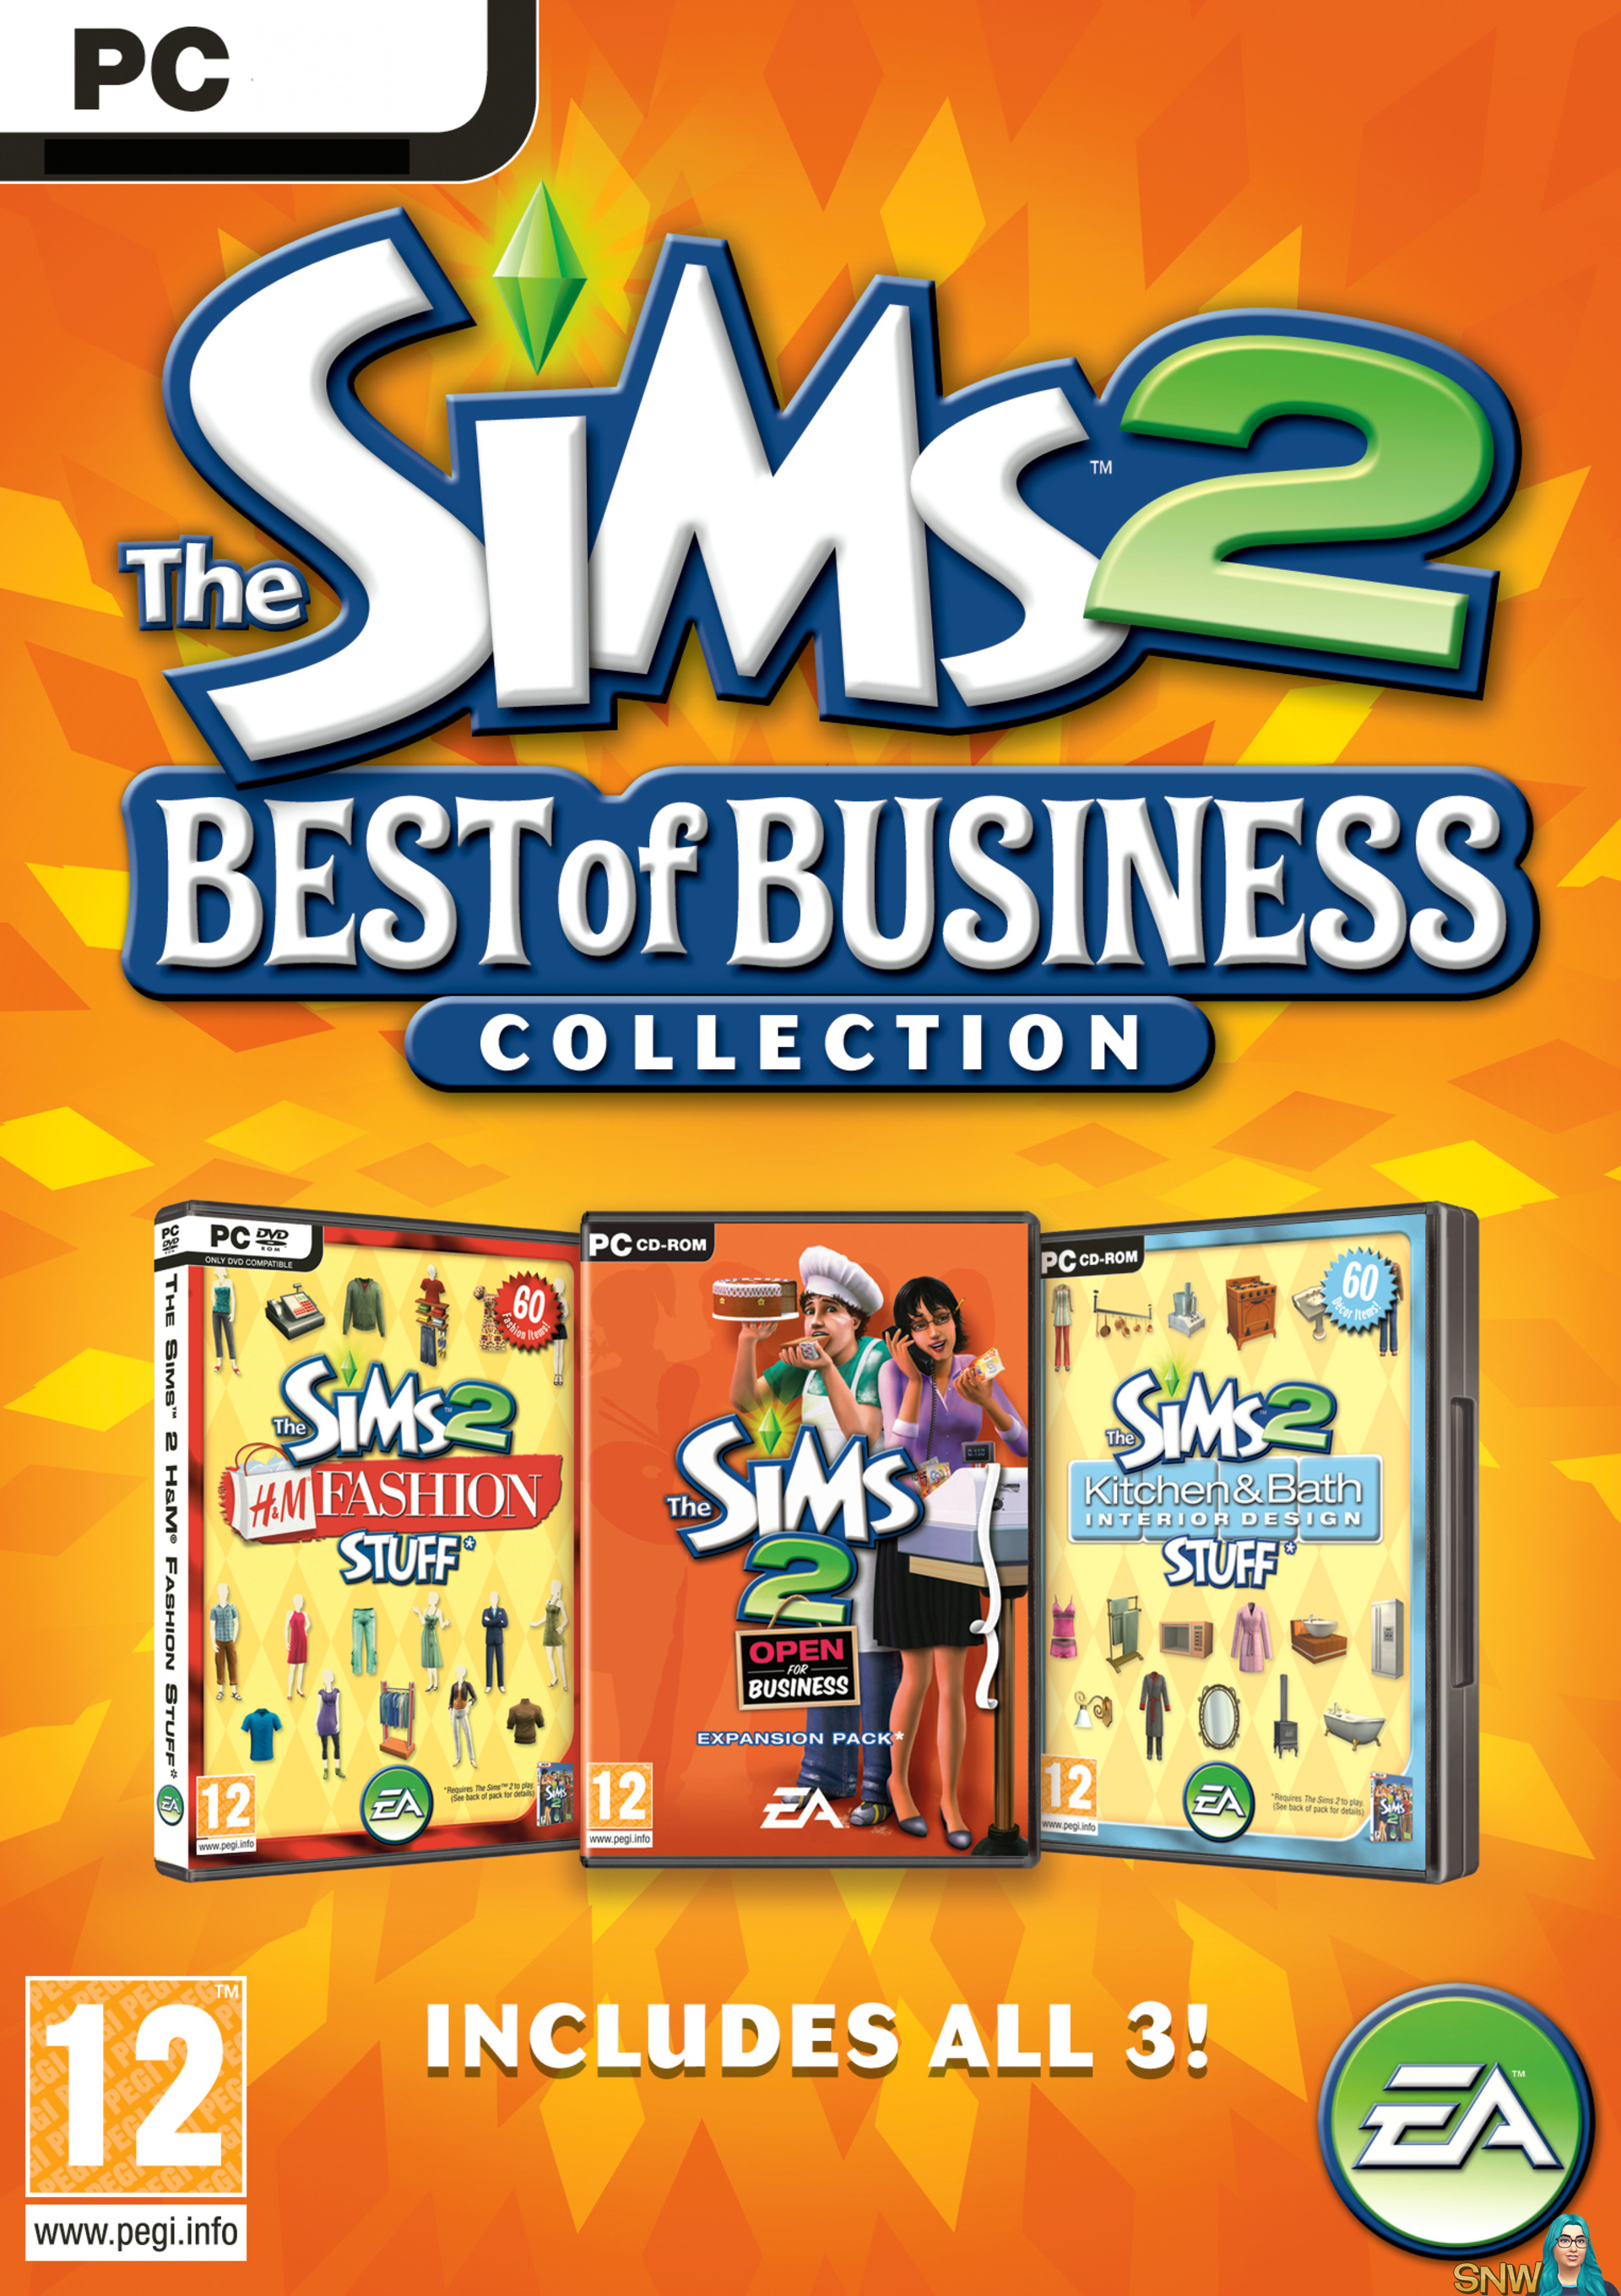 the sims 1 complete collection how to run with disk